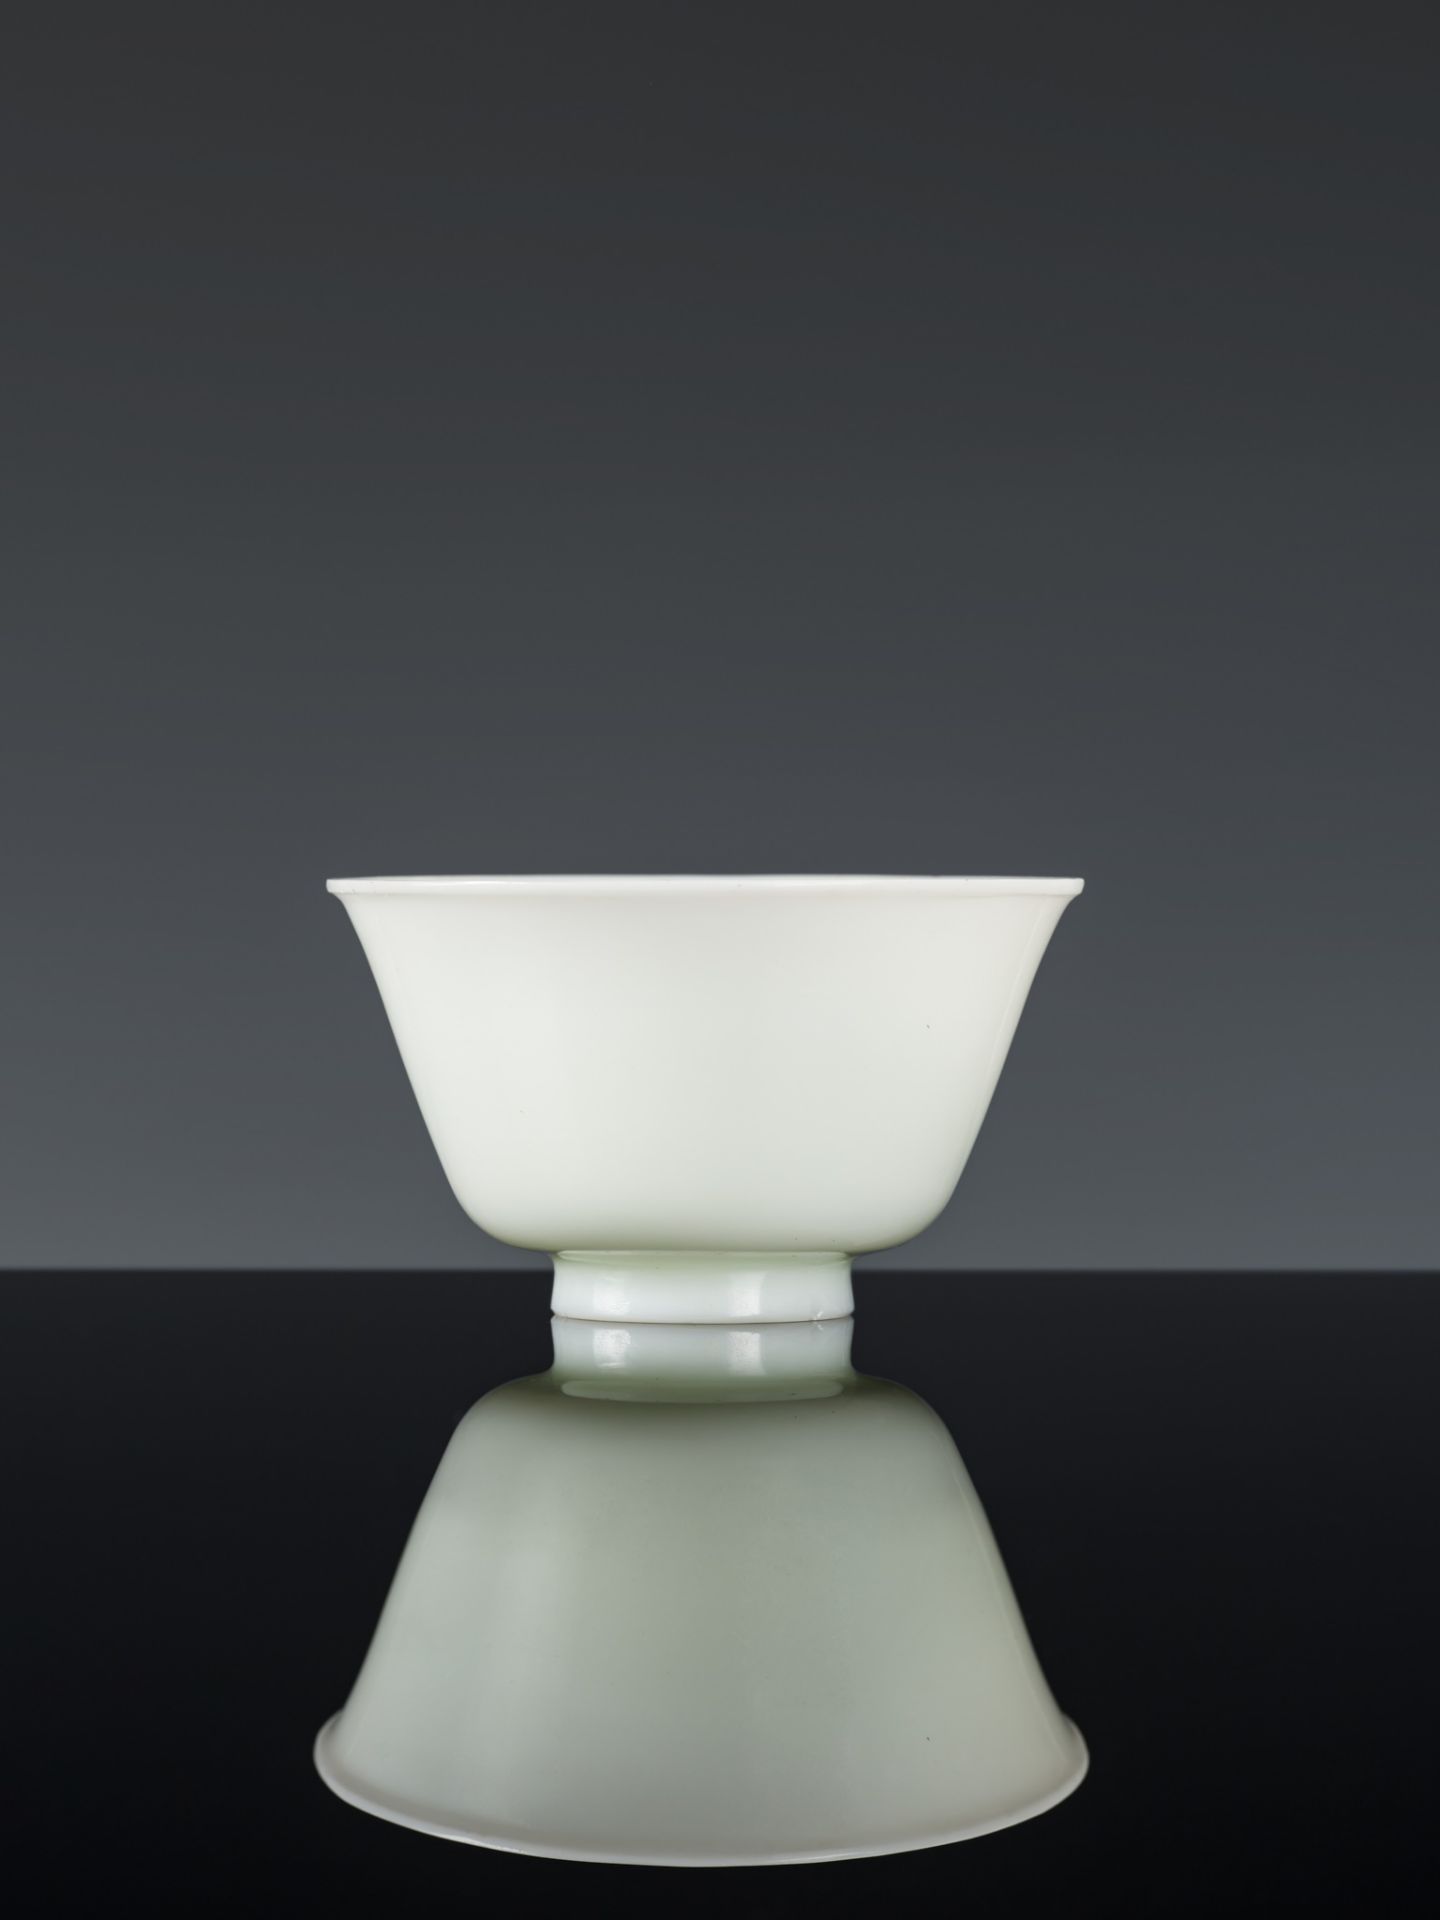 AN 'IMITATION JADE' WHITE GLASS BOWL, MID-QING DYNASTY - Image 6 of 9